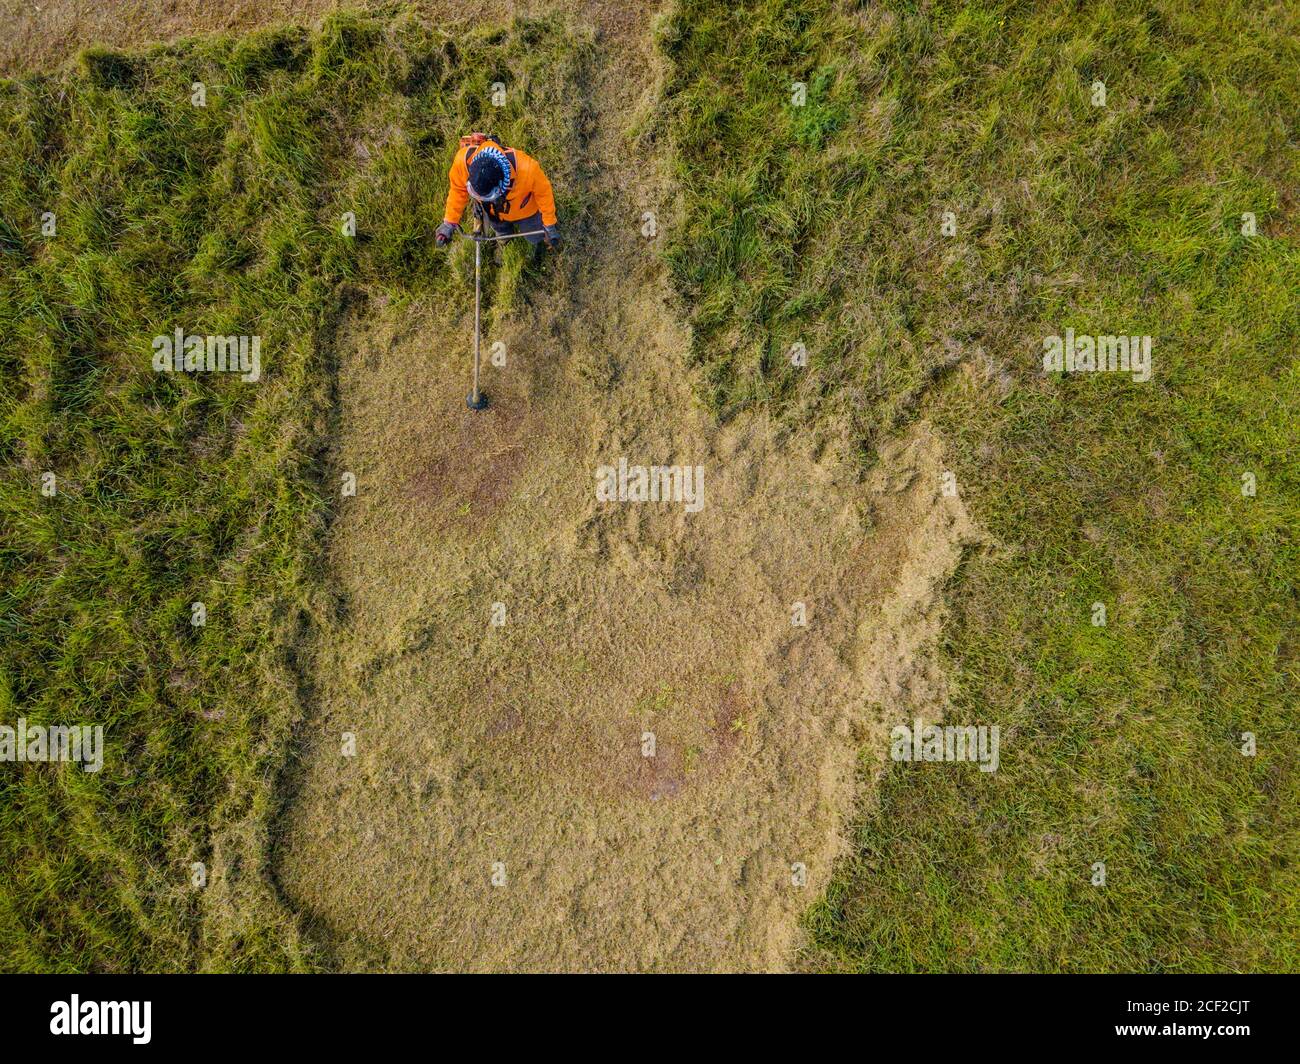 Aerial view of a man wearing protective clothing and eye covering, cutting a field of long grass. Stock Photo